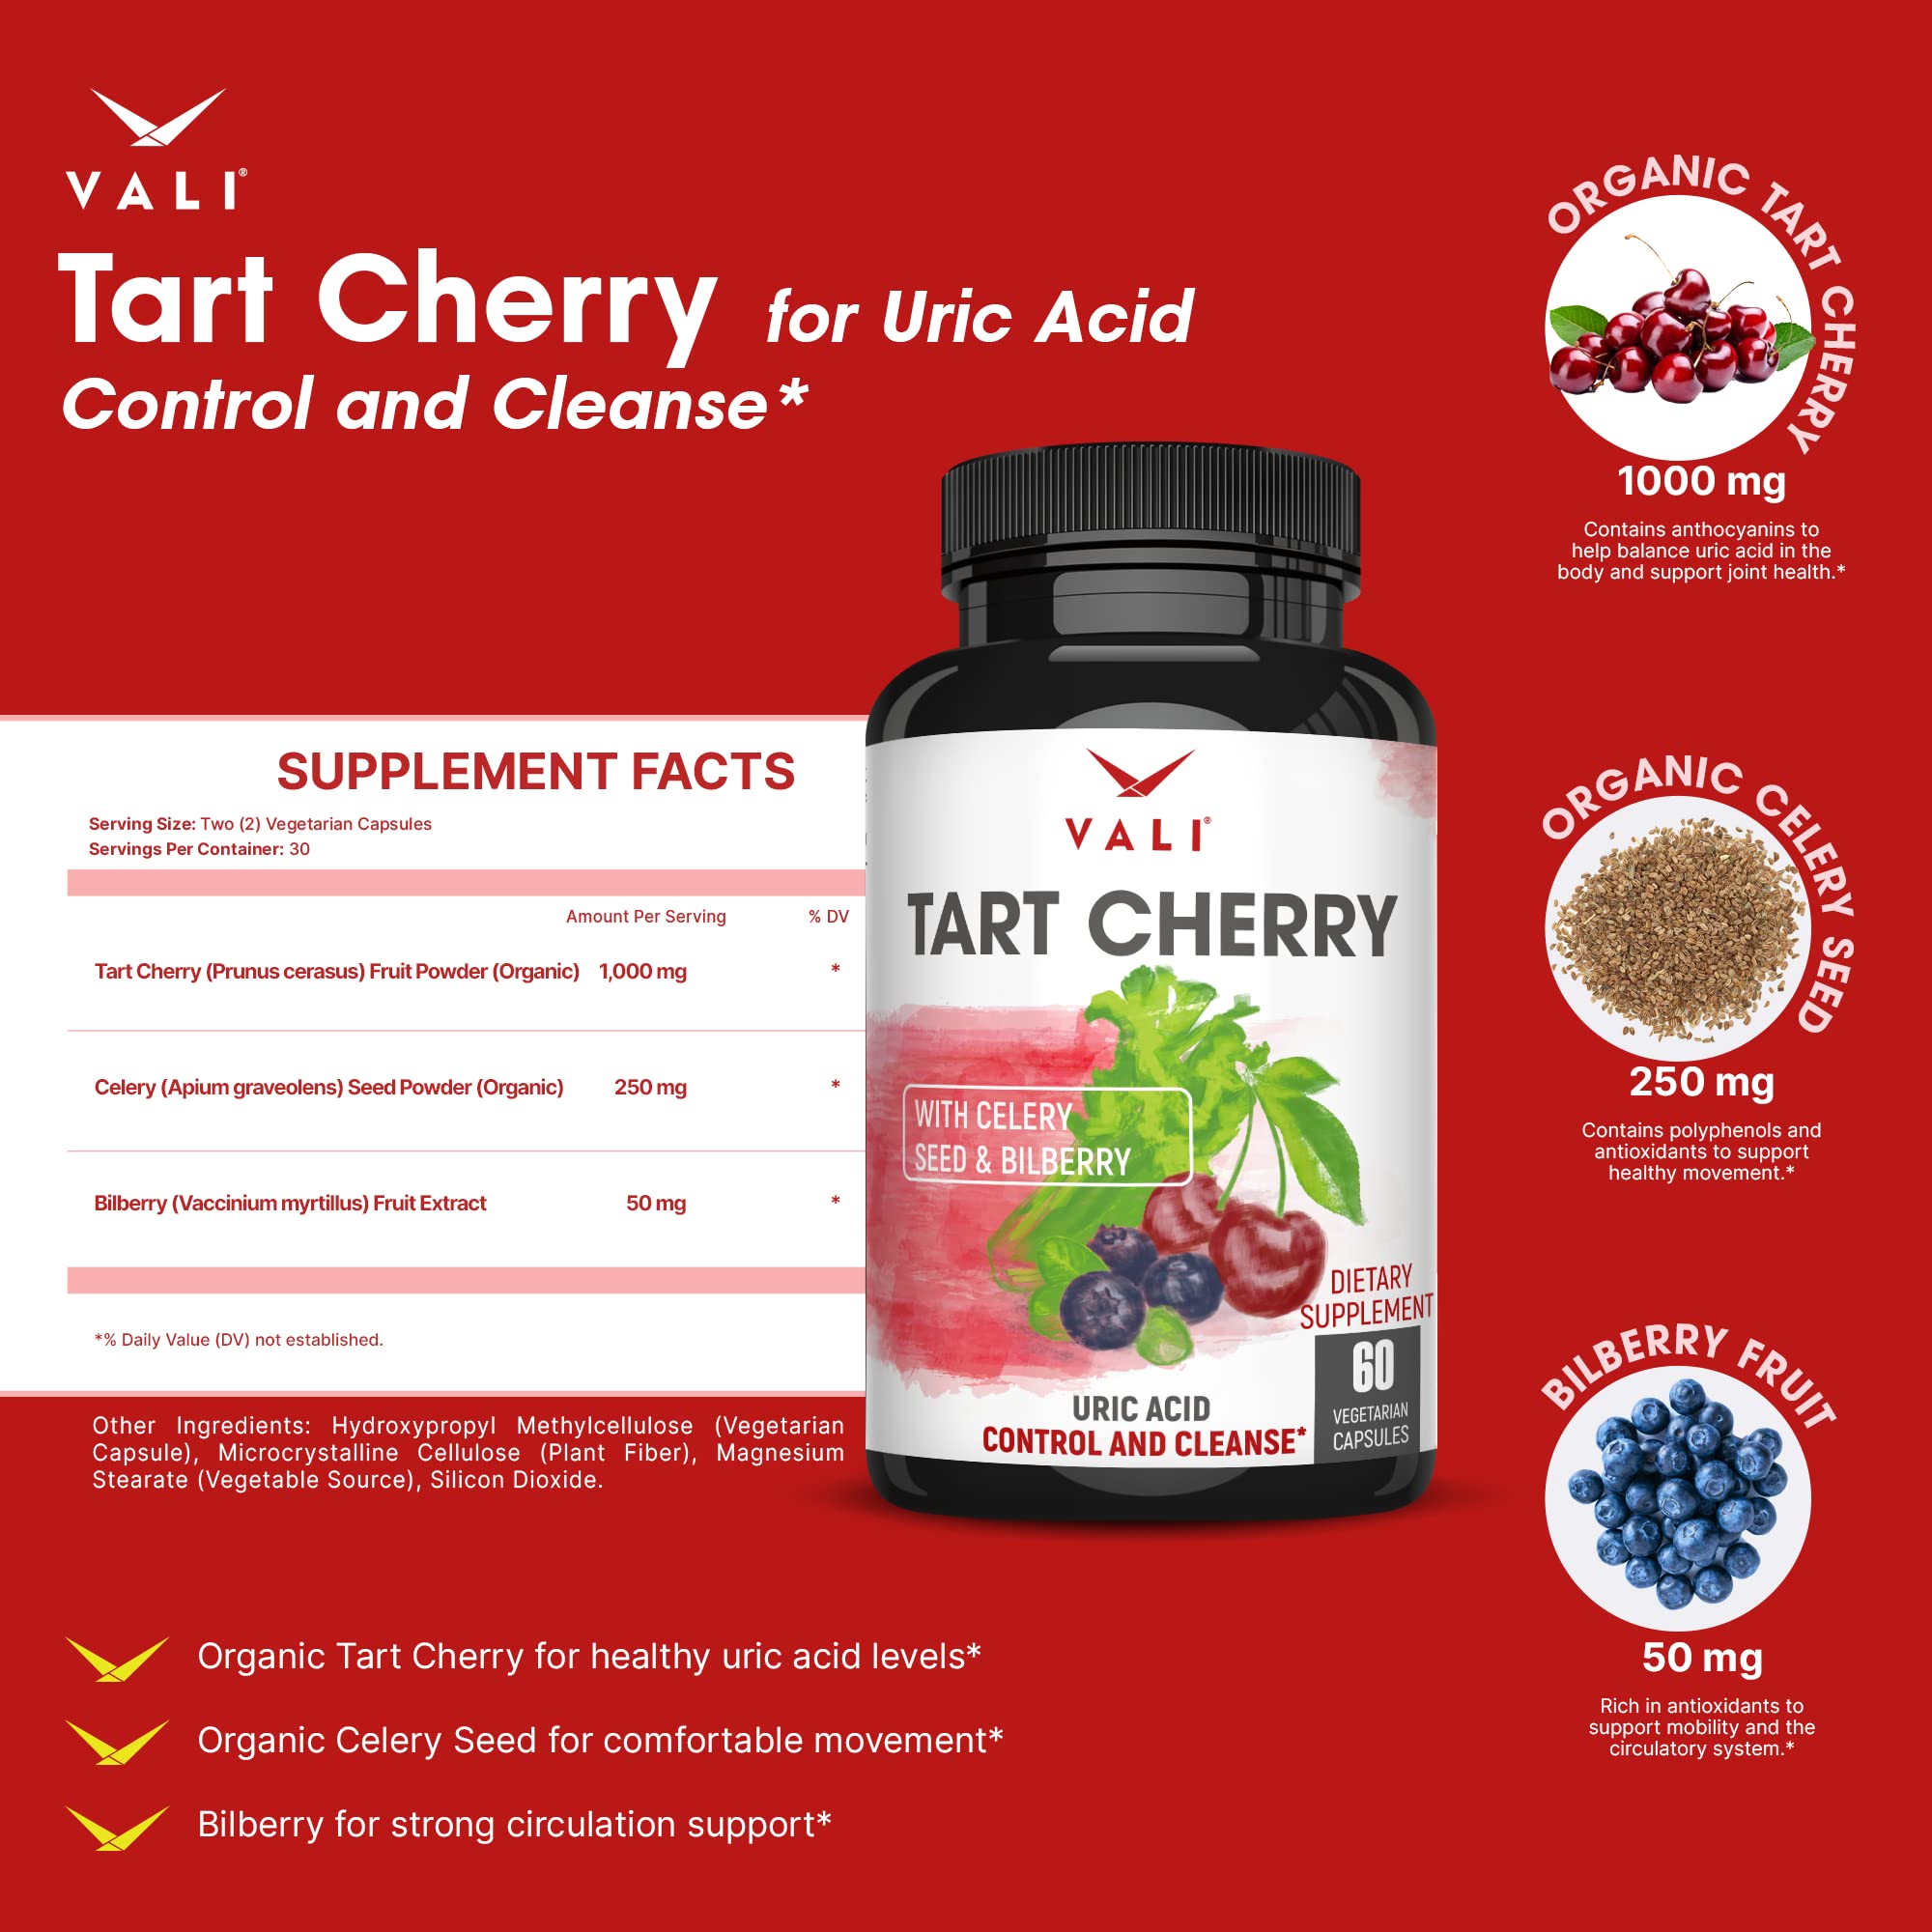 VALI D-Mannose & VALI Tart Cherry Bundle - Urinary Tract Health and Cleanse with D-Mannose, Cranberry & Hibiscus. Uric Acid Control and Cleanse with Cherry, Celery & Bilberry for Joint Muscle Support